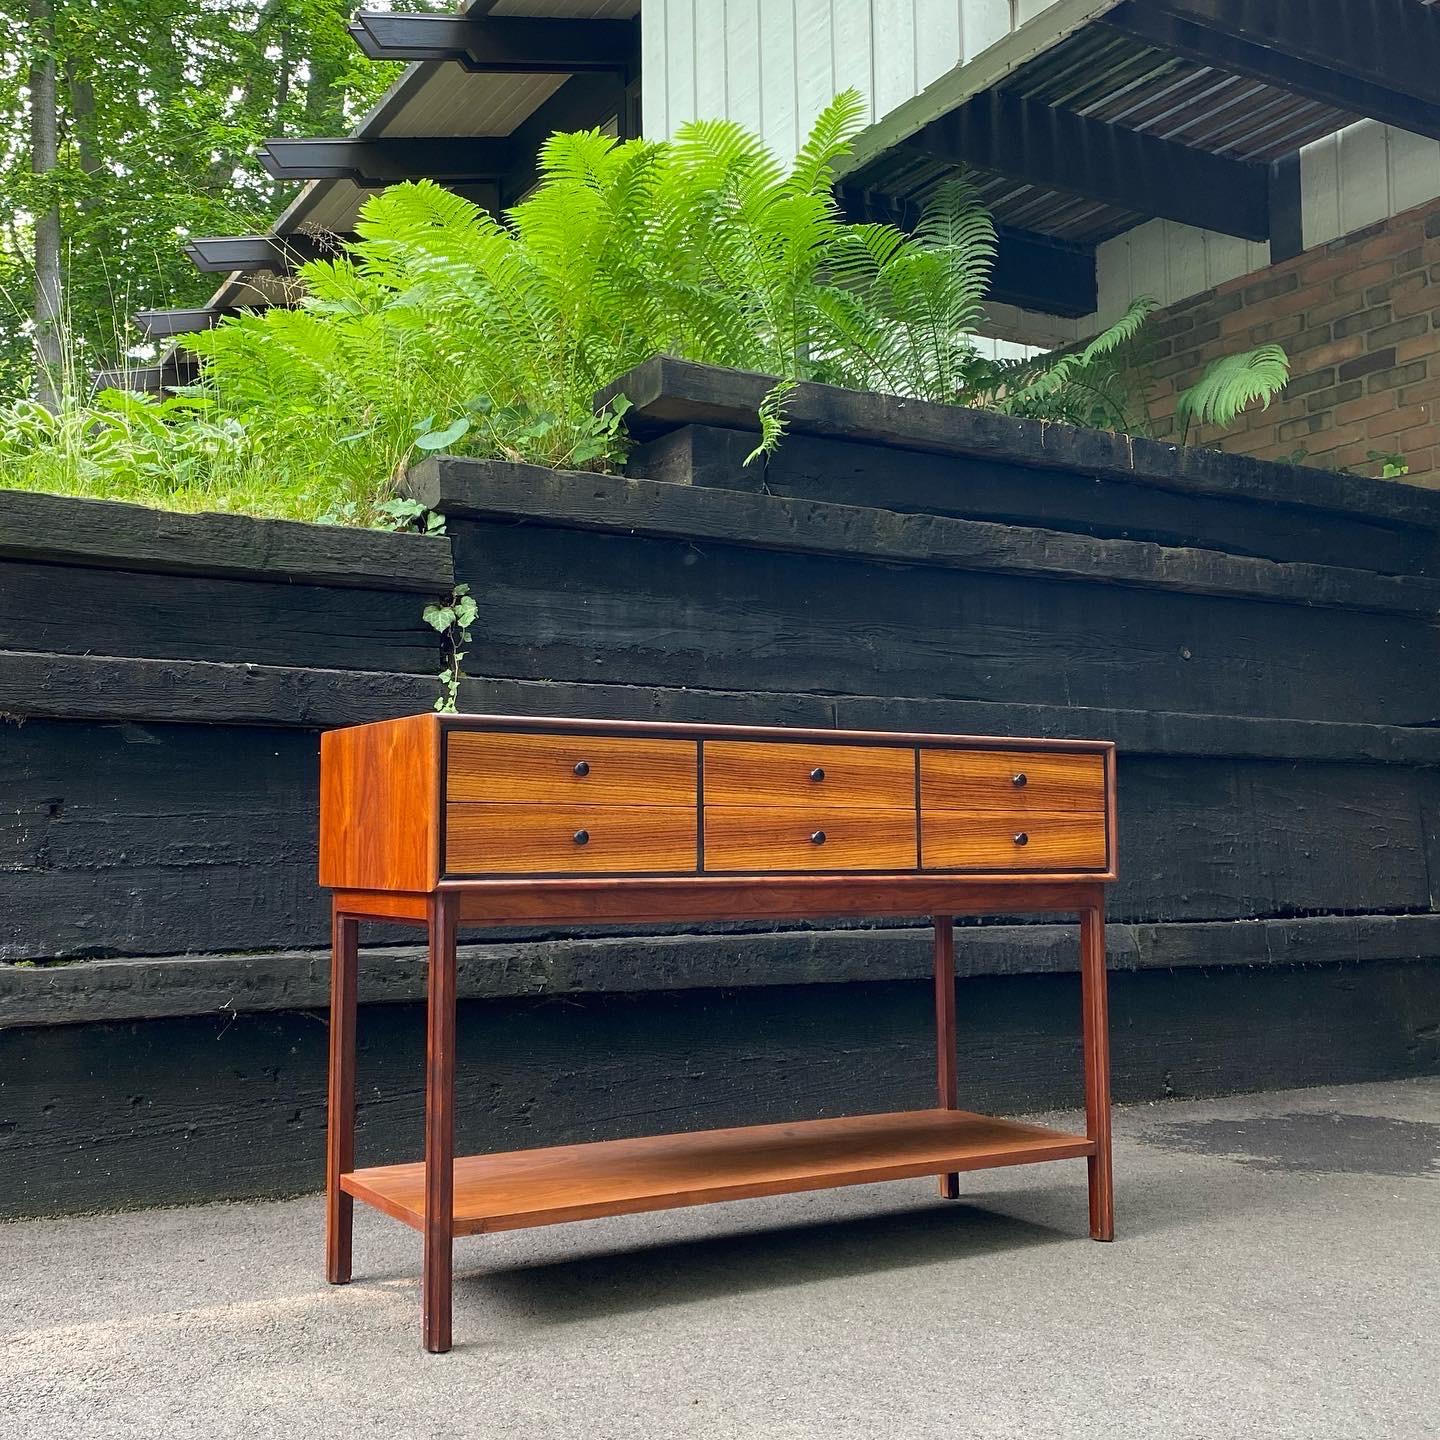 20th Century Midcentury Modern Walnut and Zebra Wood Sideboard Jack Cartwright for Founders